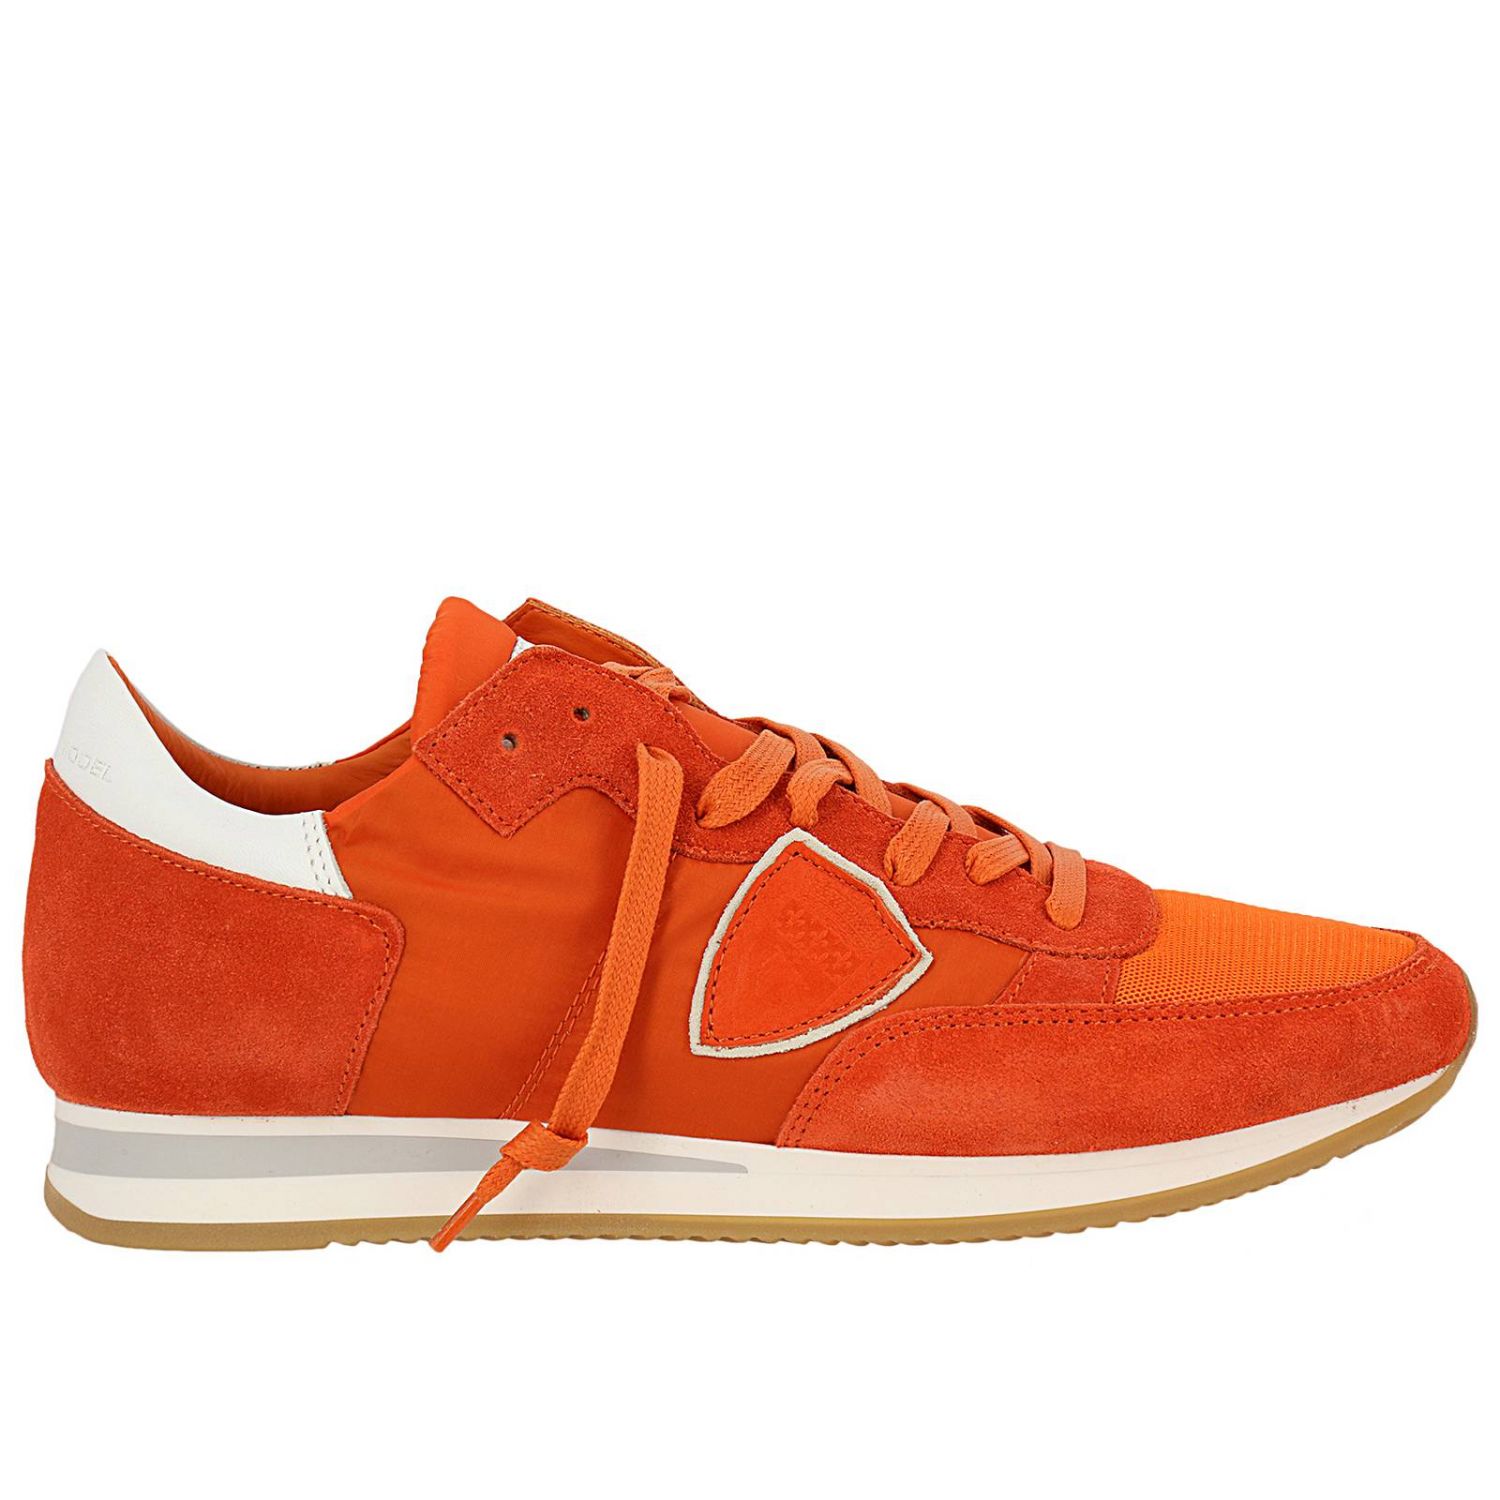 Philippe Model Outlet: Shoes men - Orange | Trainers Philippe Model ...